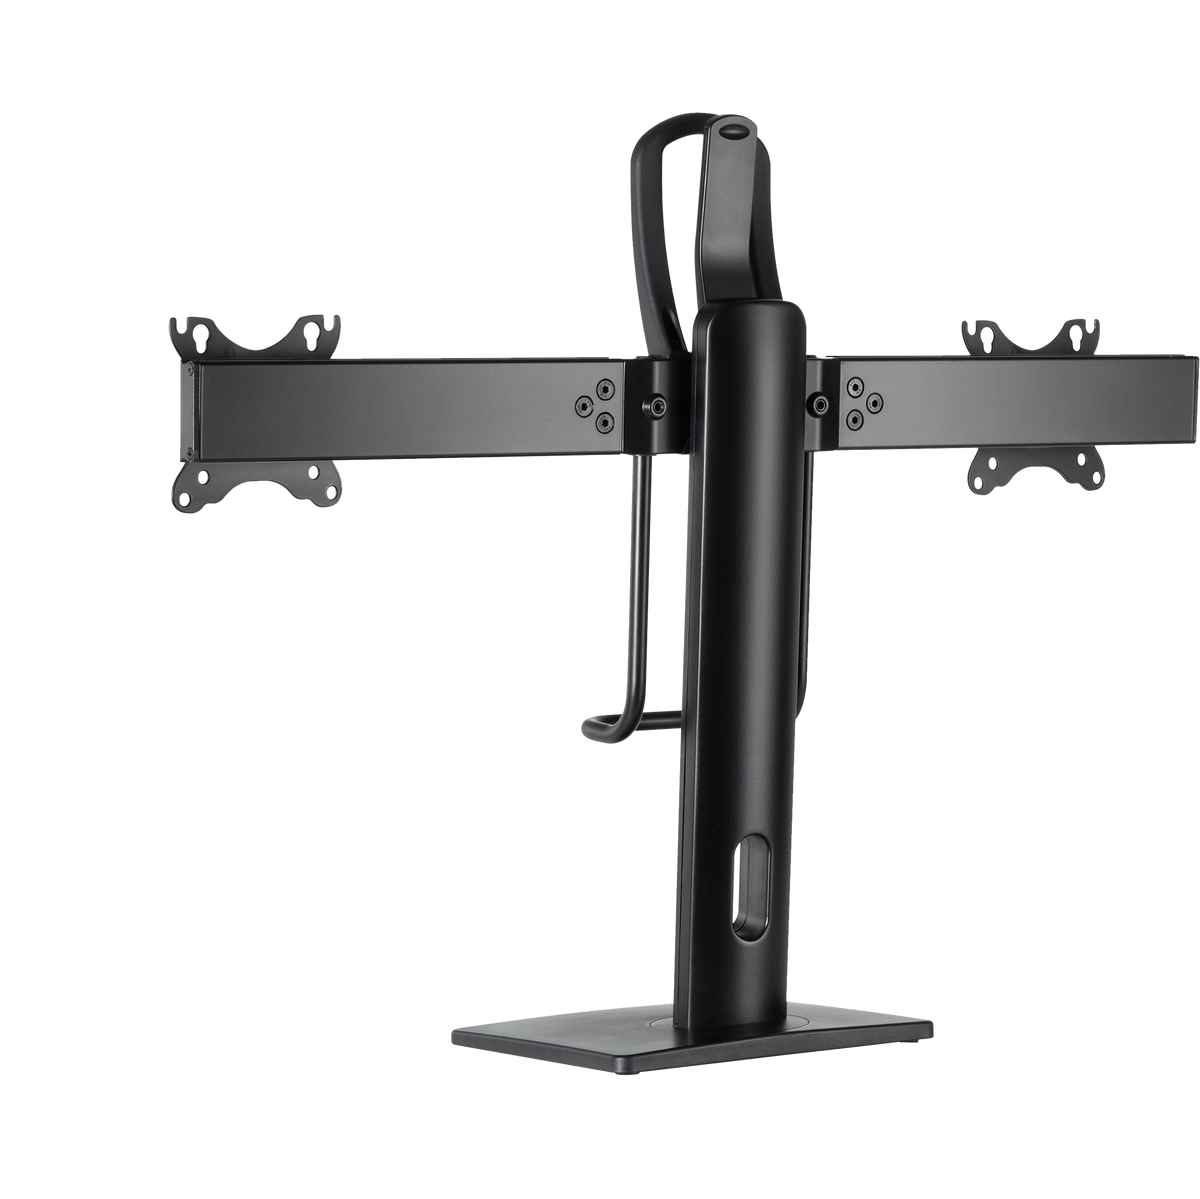 GAMEON GO-2052 Easy To Adjust Vertical Lift Dual Screens Monitor Arm, Stand And Mount For Gaming And Office Use, 17" - 27", Each Arm Up To 6 KG, Black